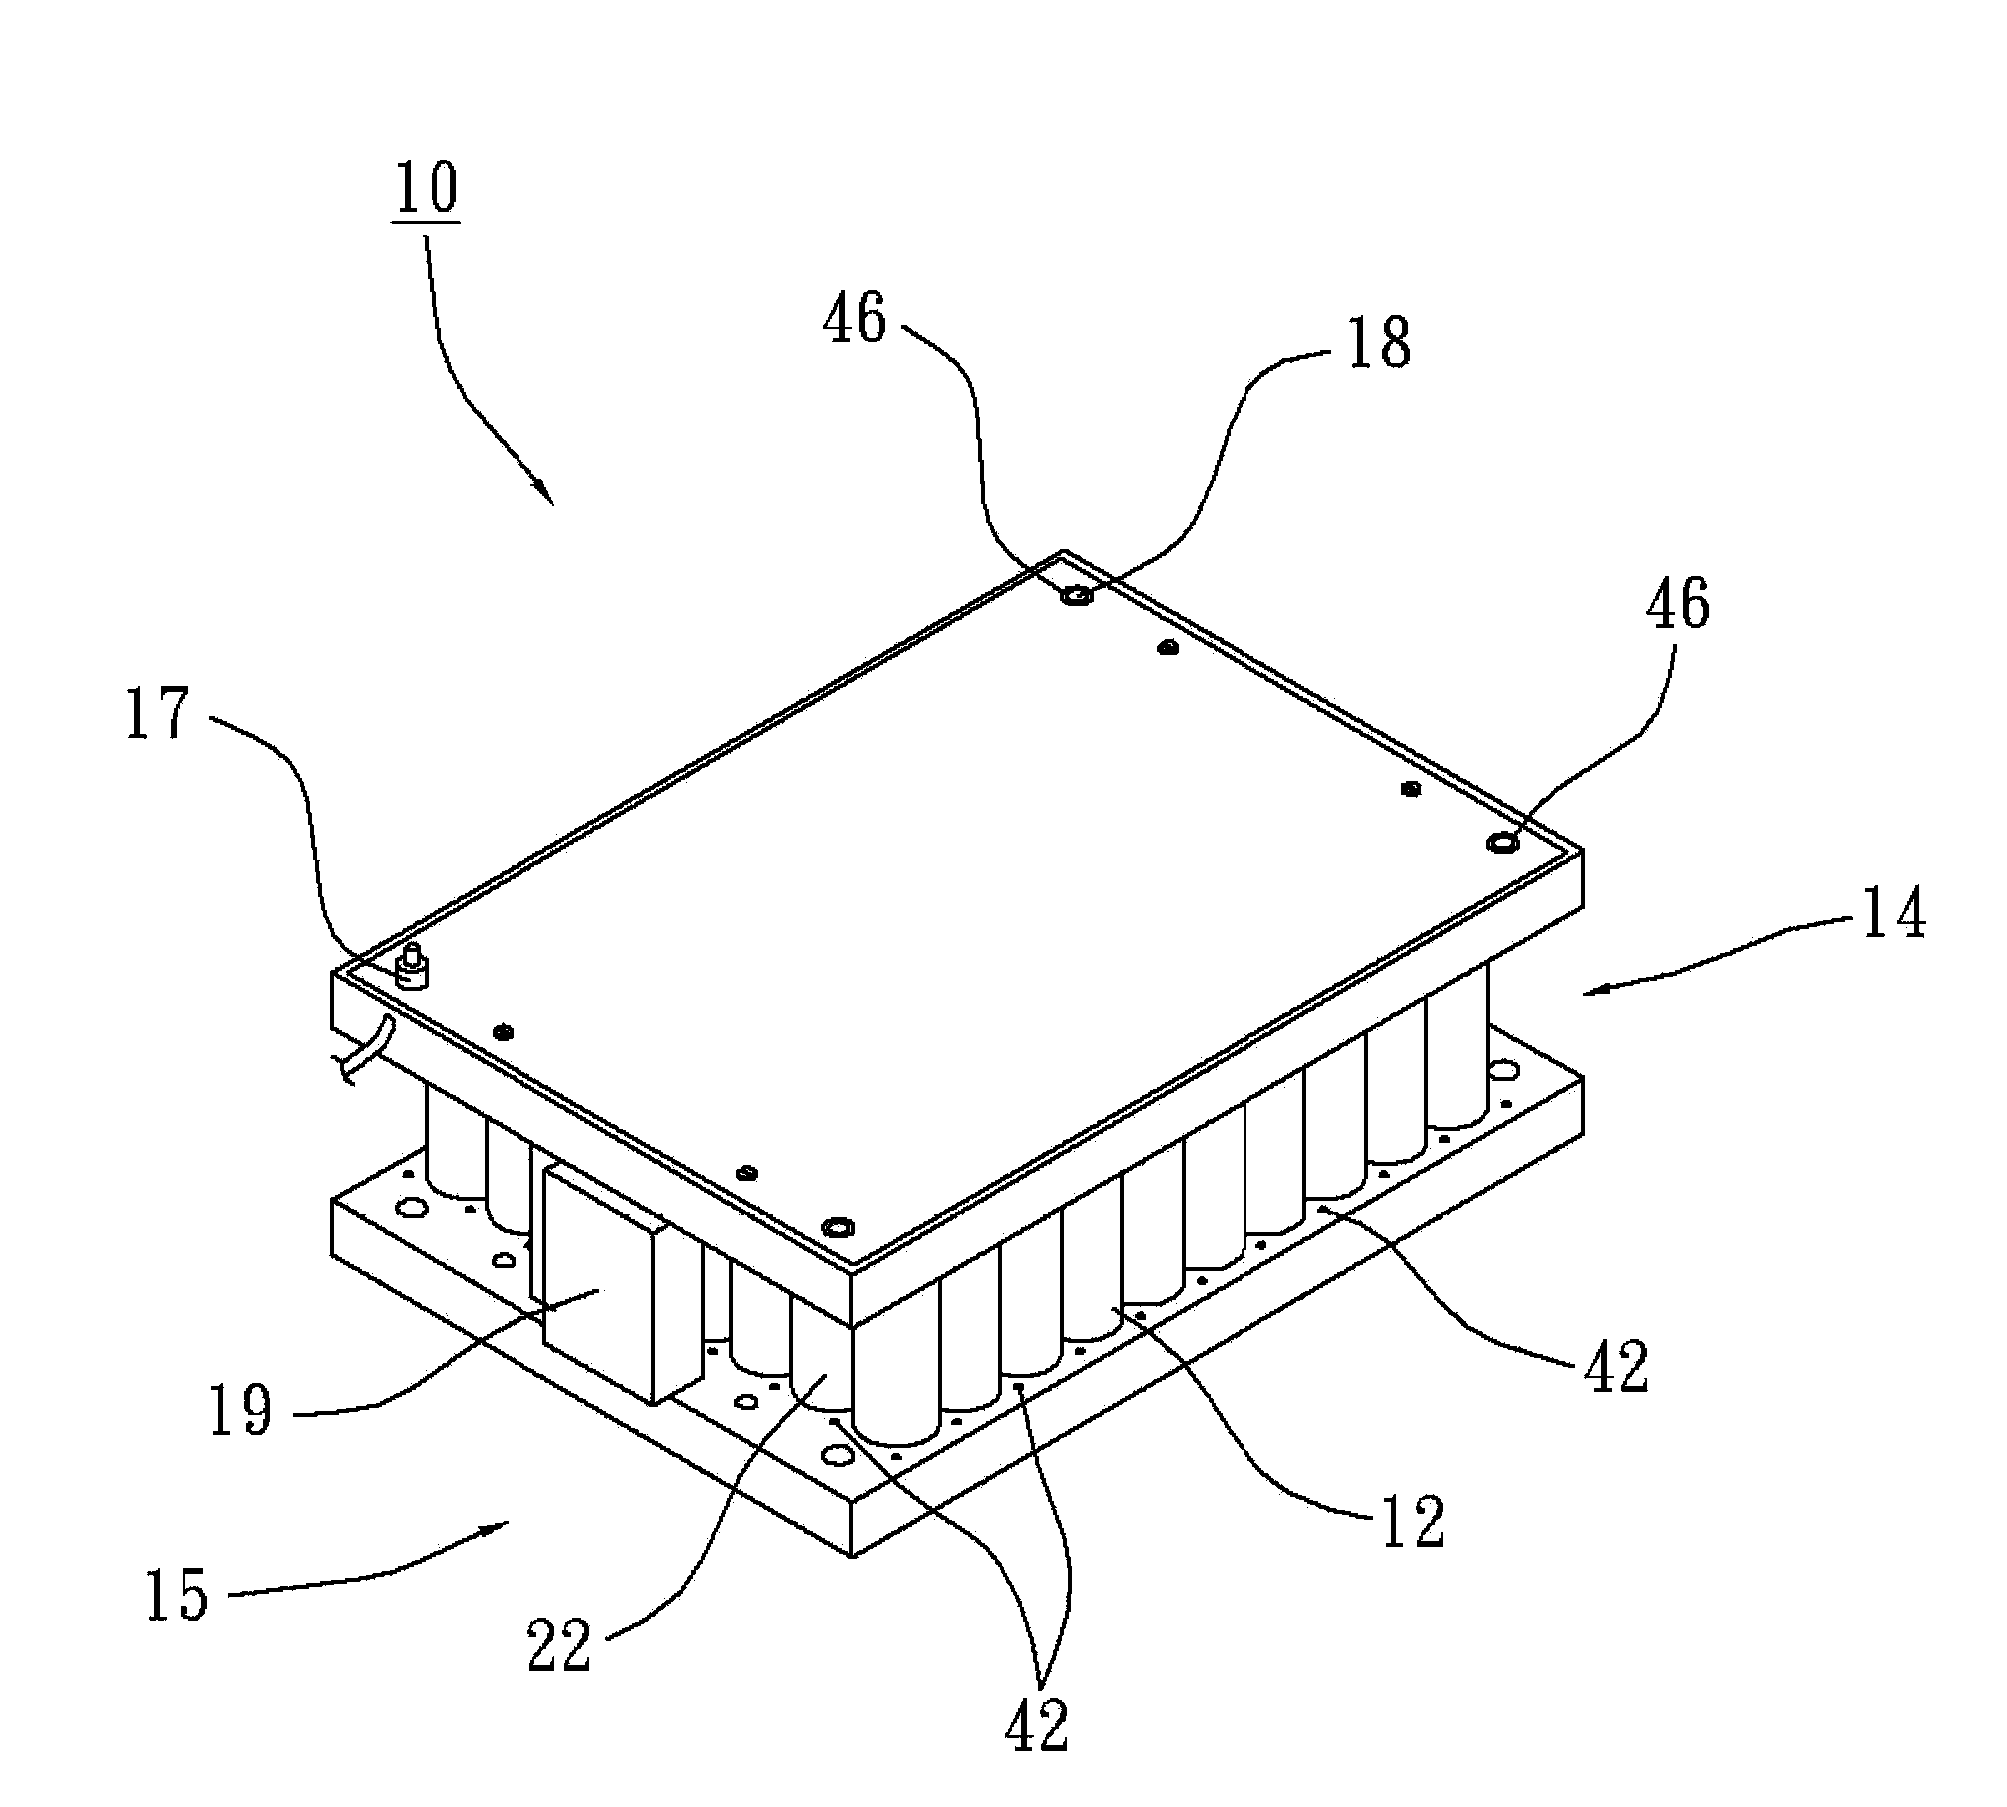 Battery security module capable of radiating heat, insulating heat, and retarding flame